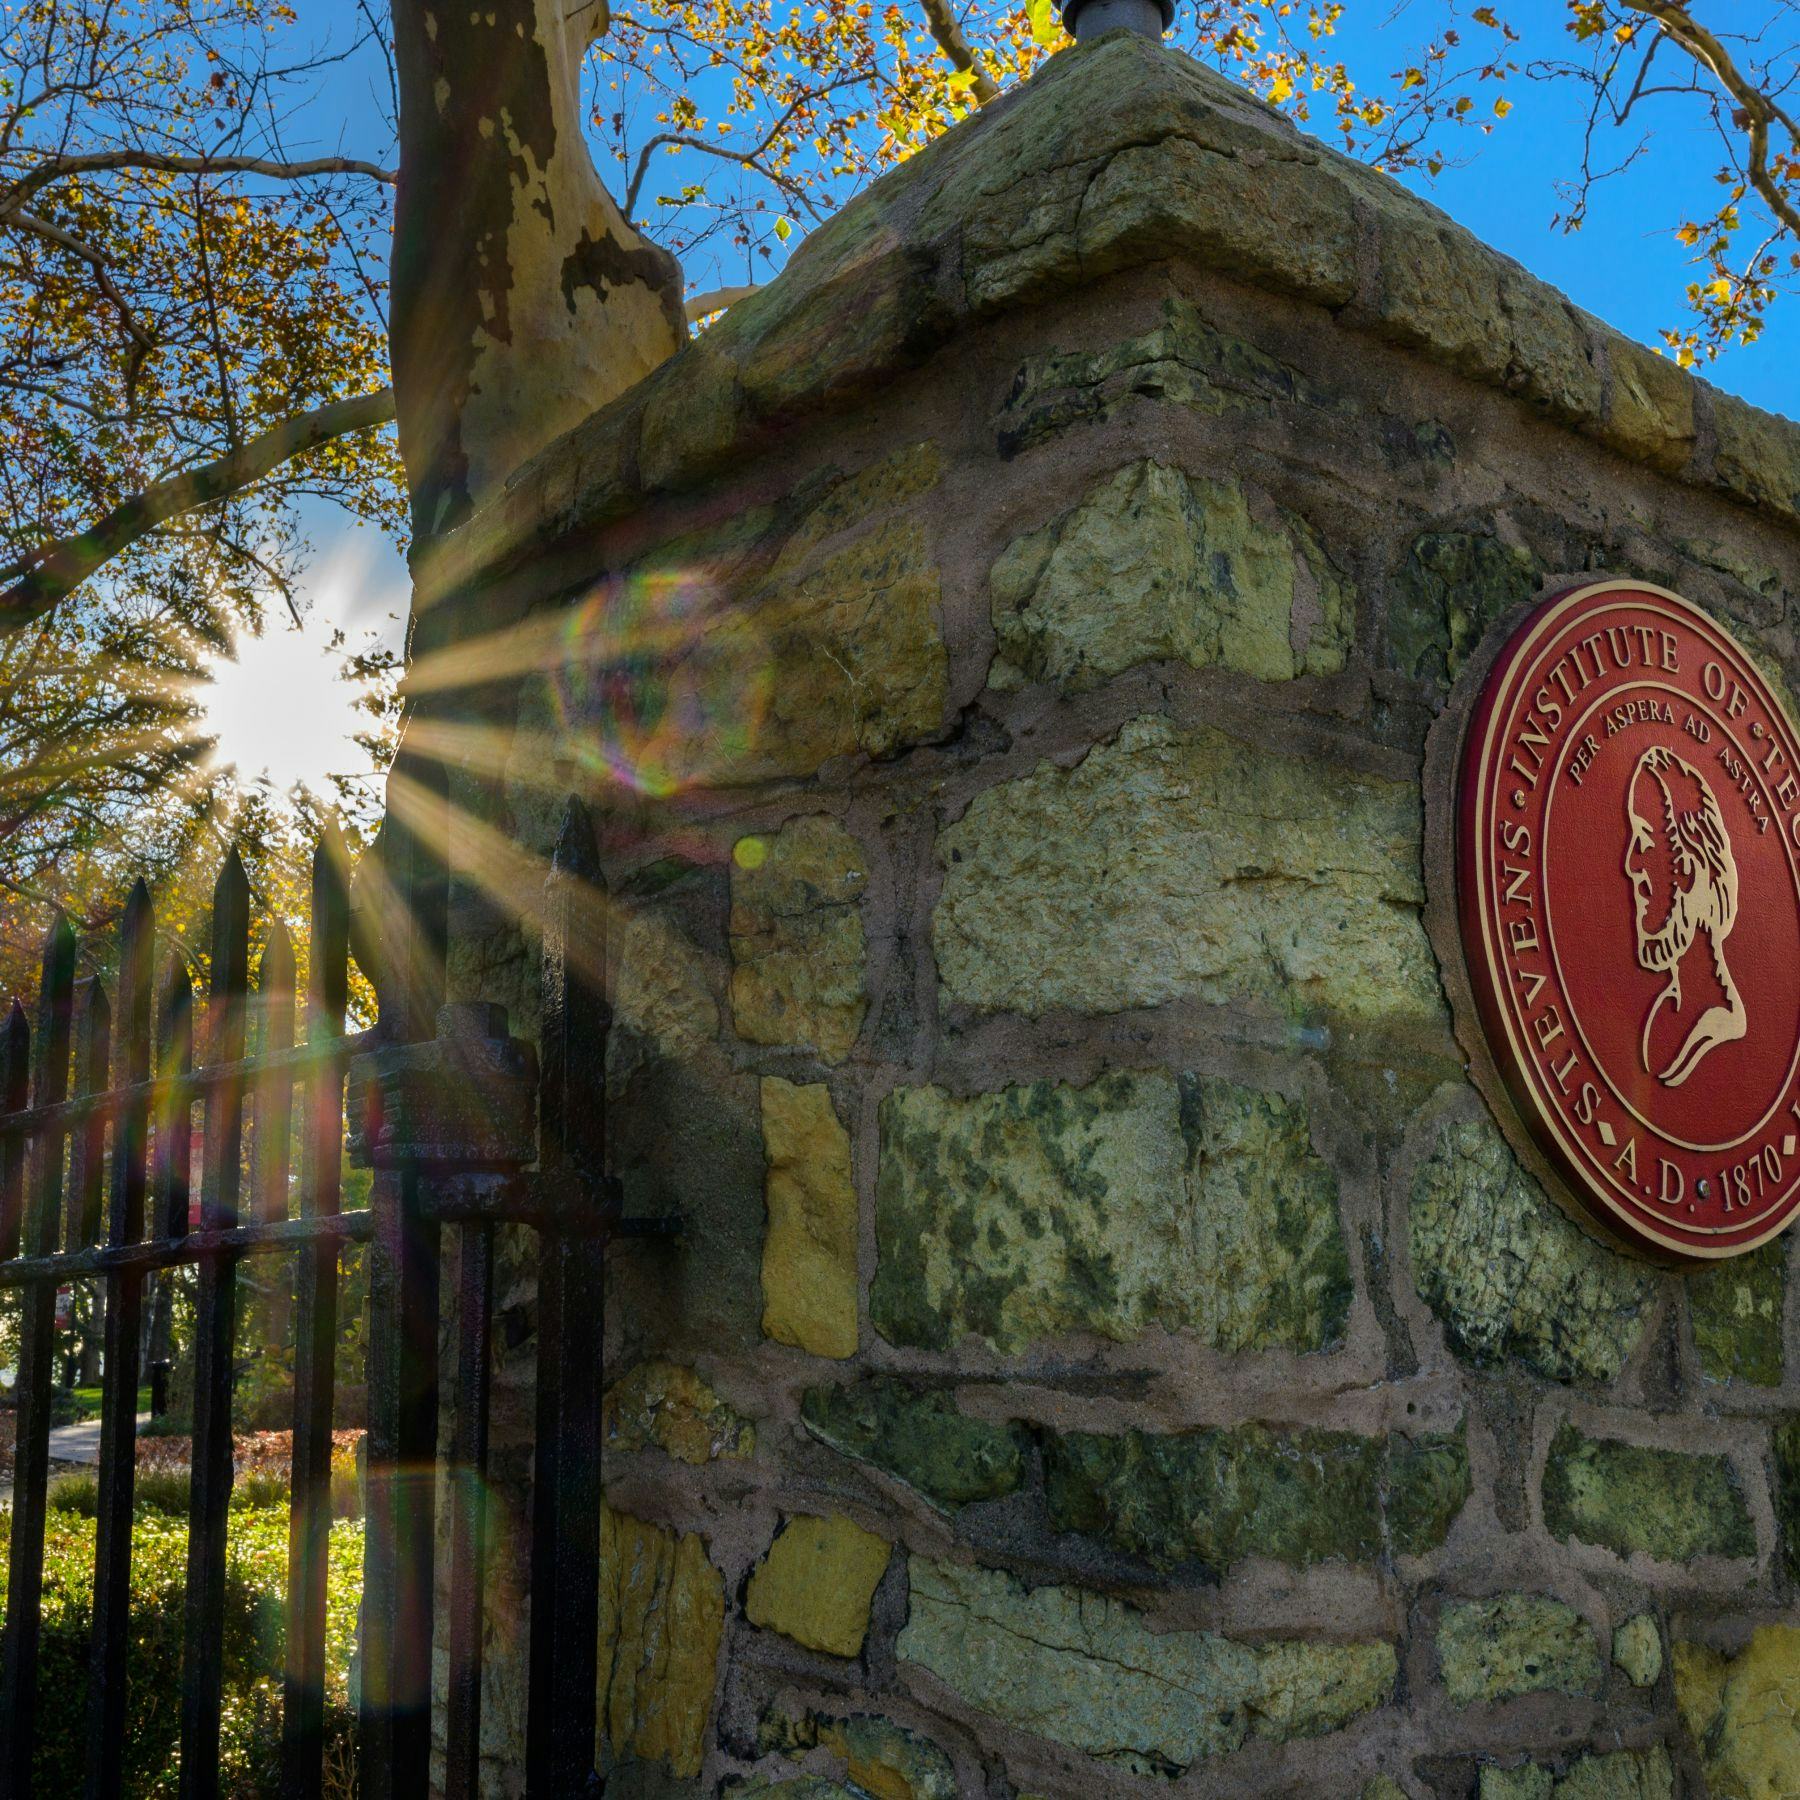 Gateway entrance to Stevens campus with presidents seal and sun shining through trees.